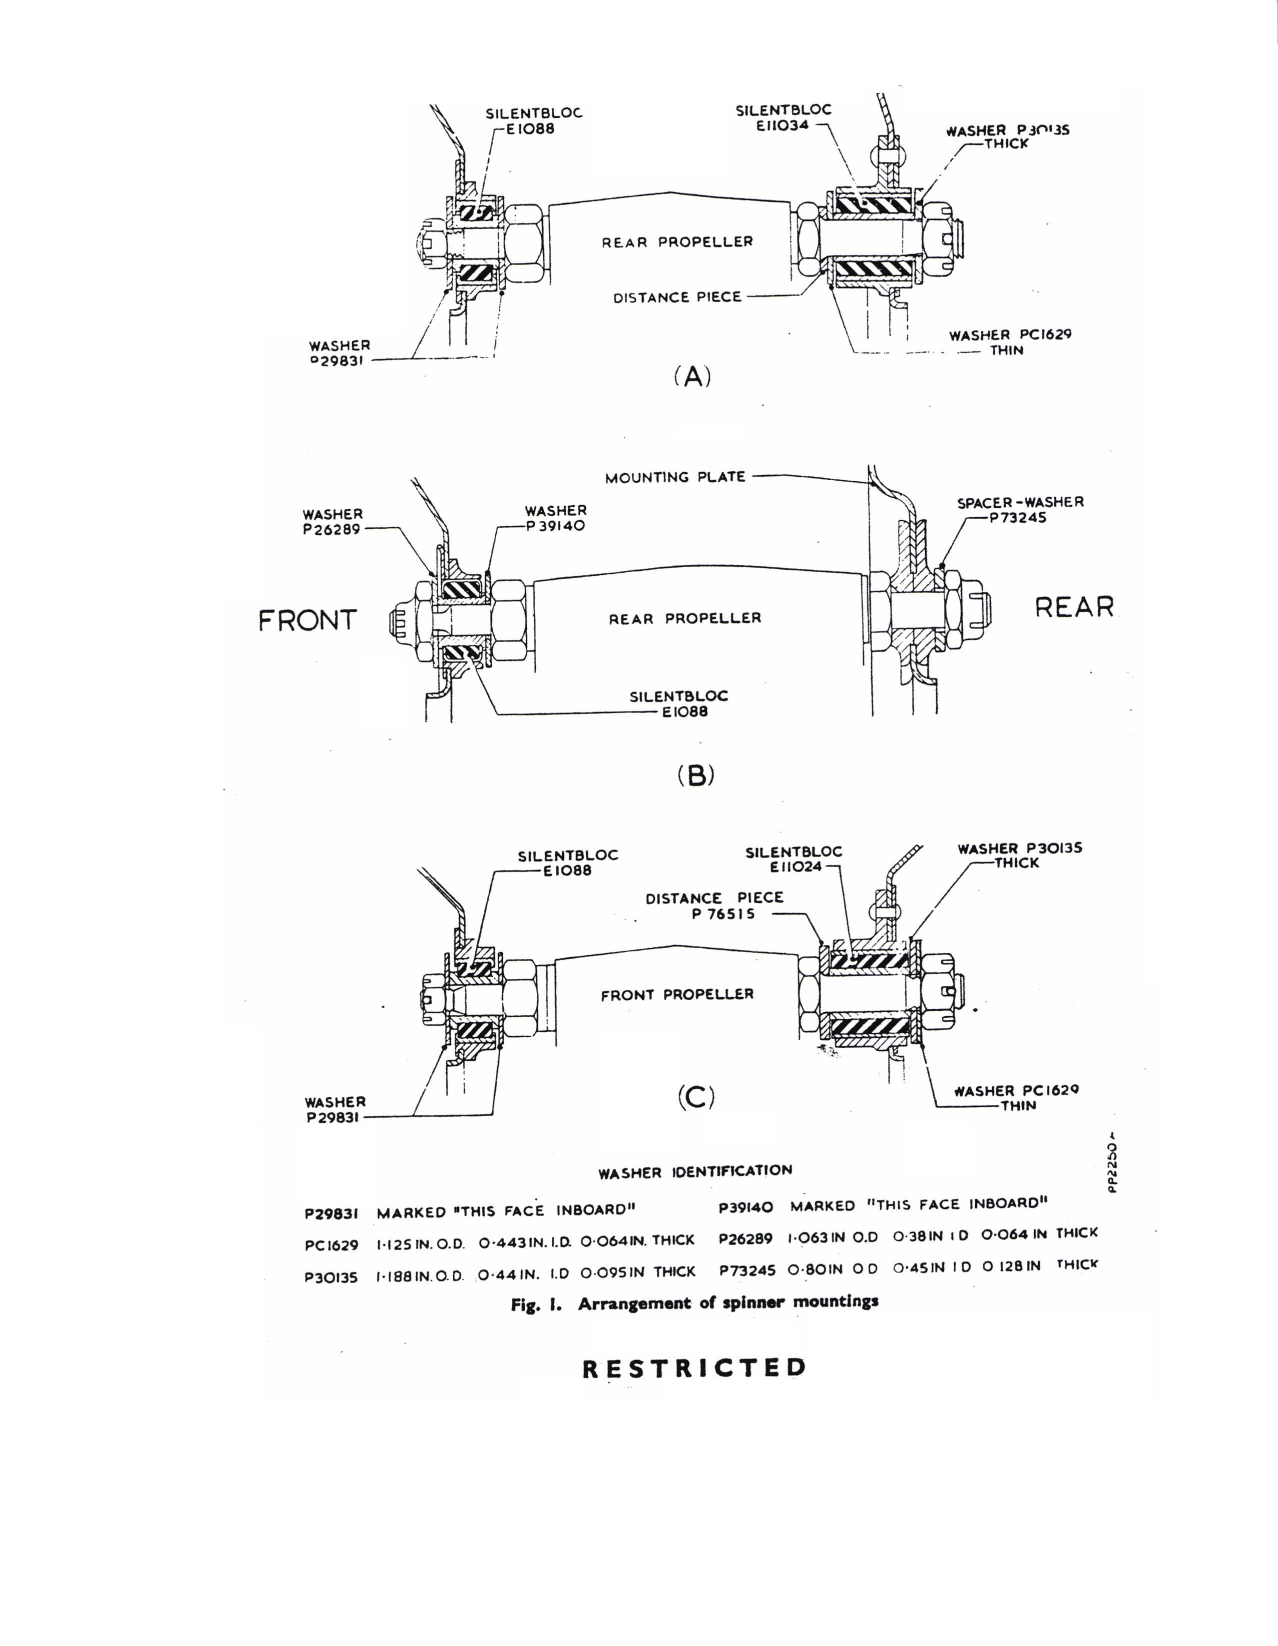 Sample page 7 from AirCorps Library document: de Havilland Variable Pitch Propellers